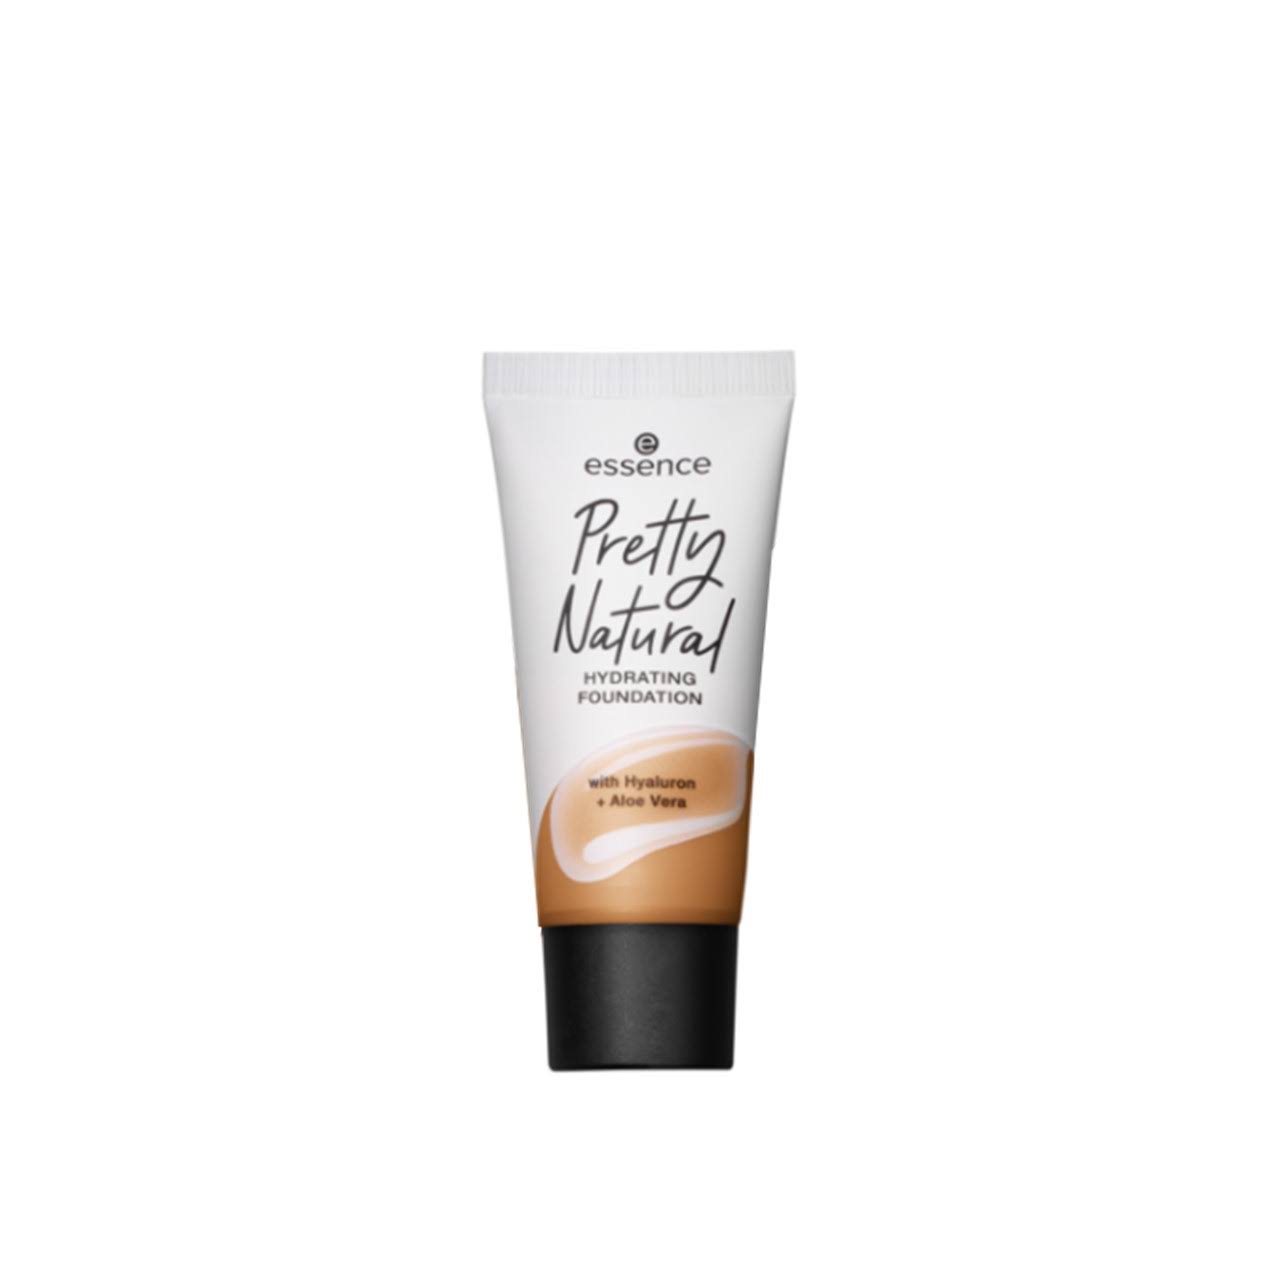 Essence Pretty Natural Hydrating Foundation - Cool Beige 110